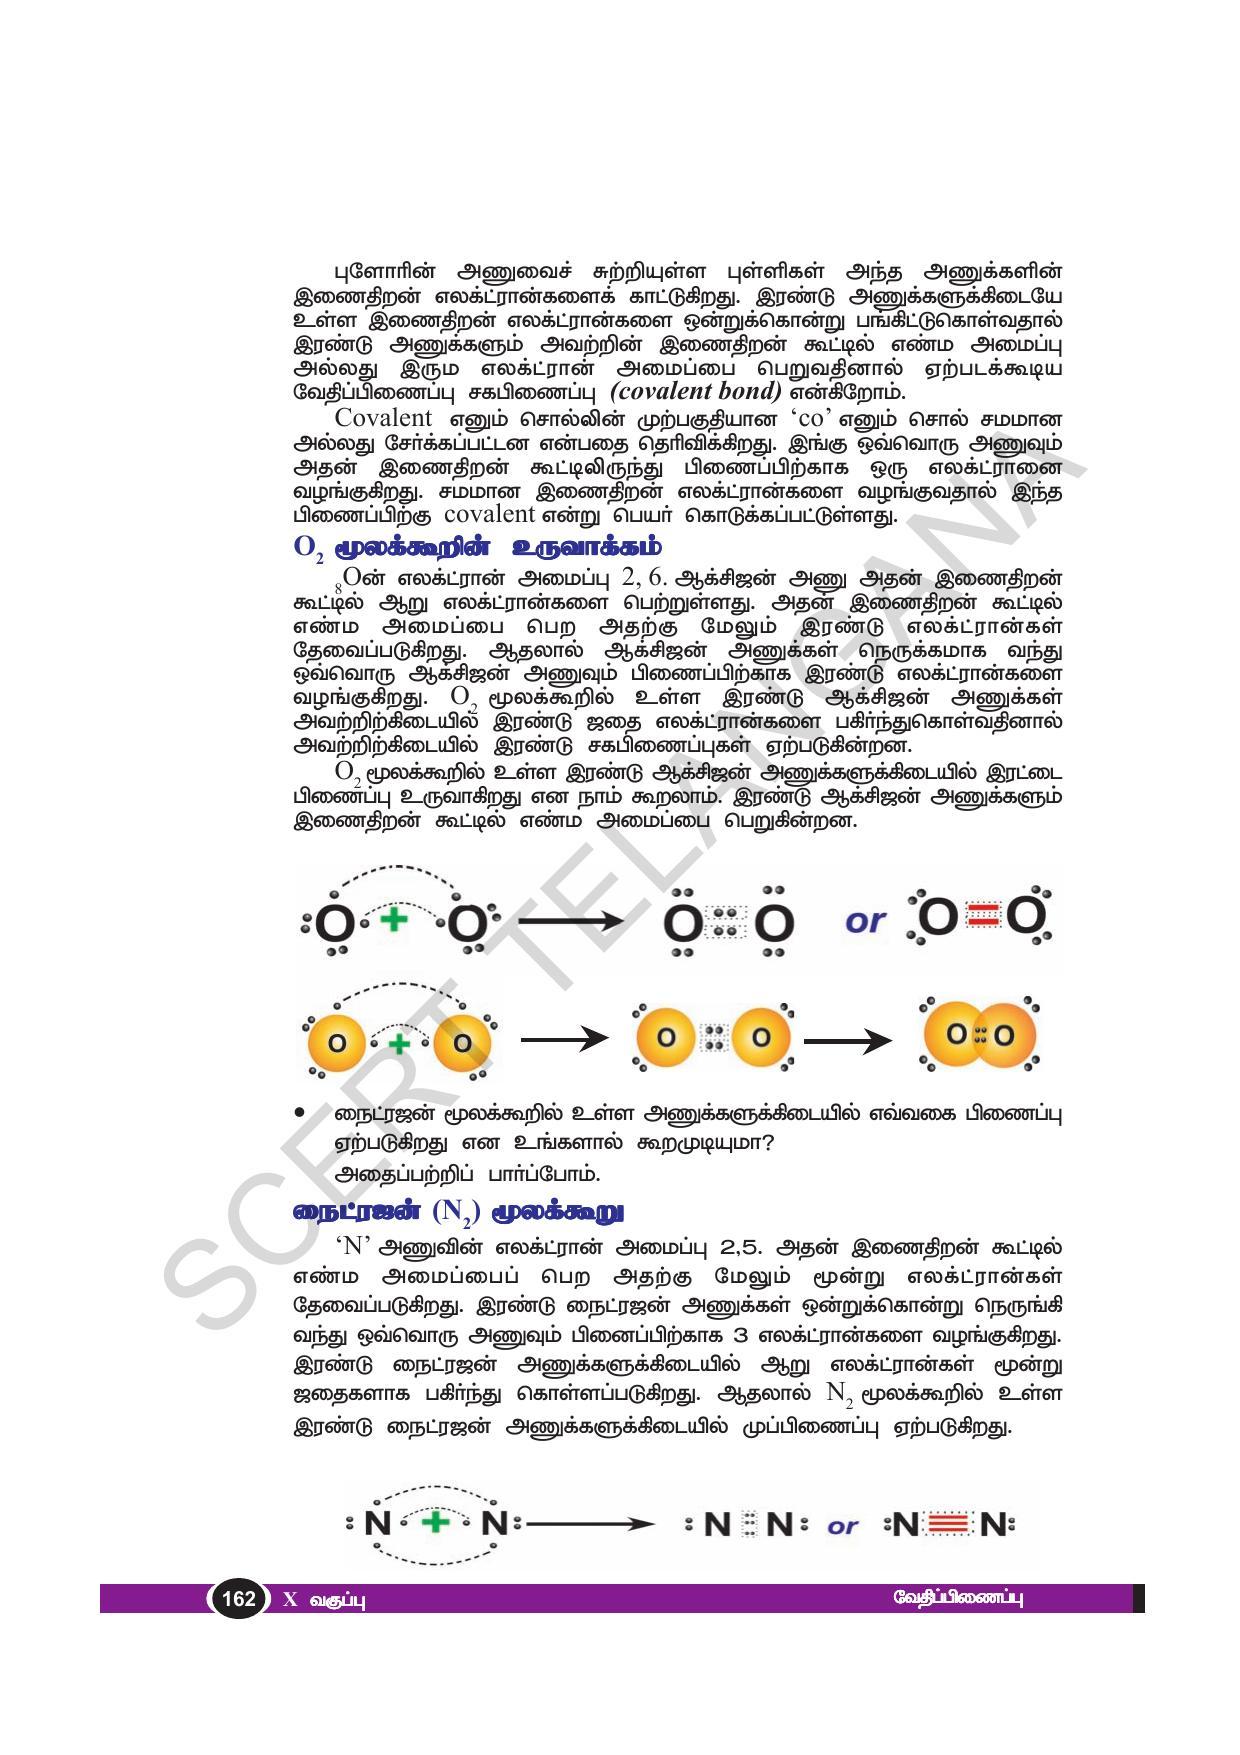 TS SCERT Class 10 Physical Science(Tamil Medium) Text Book - Page 174